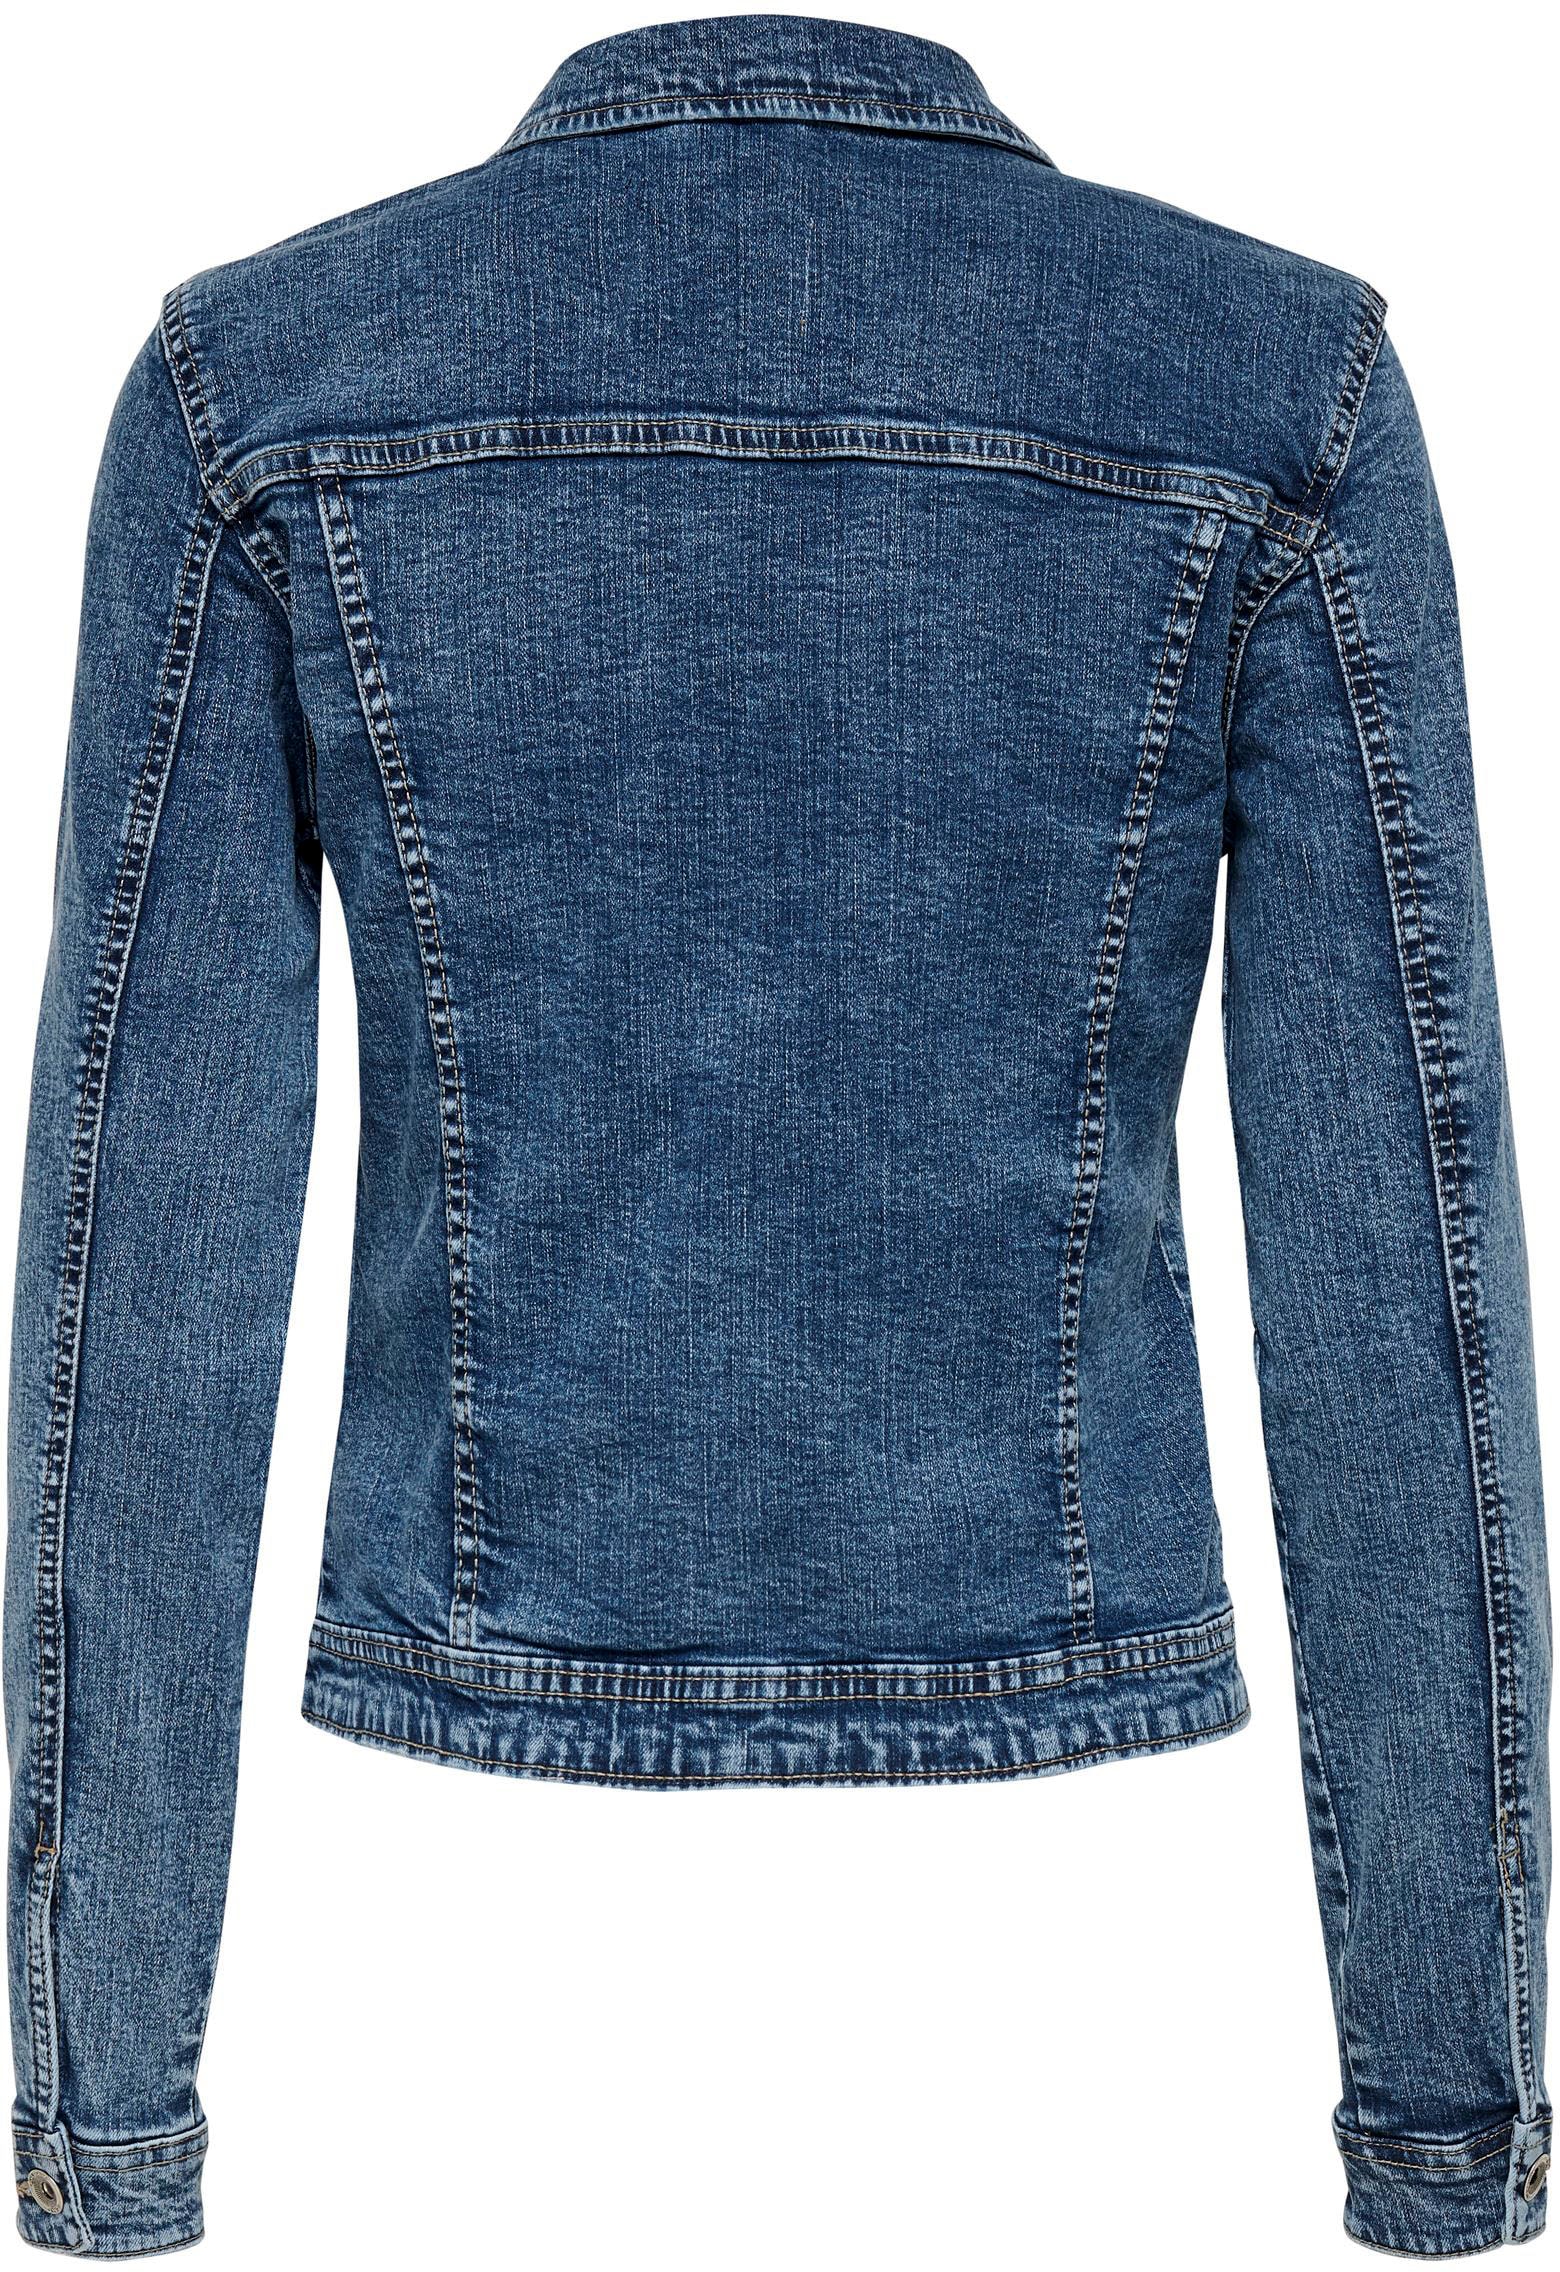 ONLY Jeansjacke »TIA«, in leichter Used-Waschung mit Stretch